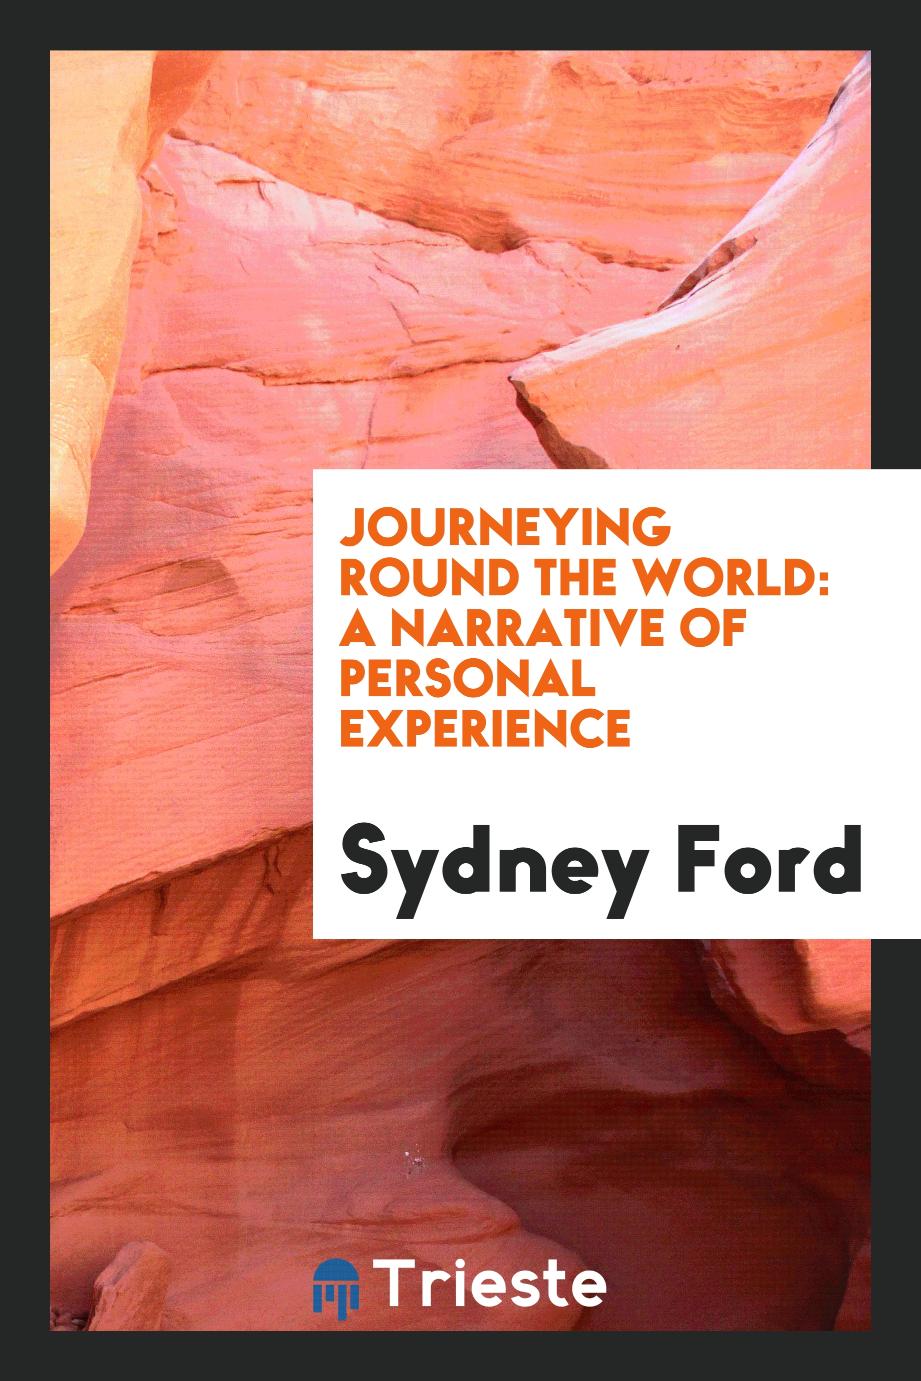 Journeying Round the World: A Narrative of Personal Experience